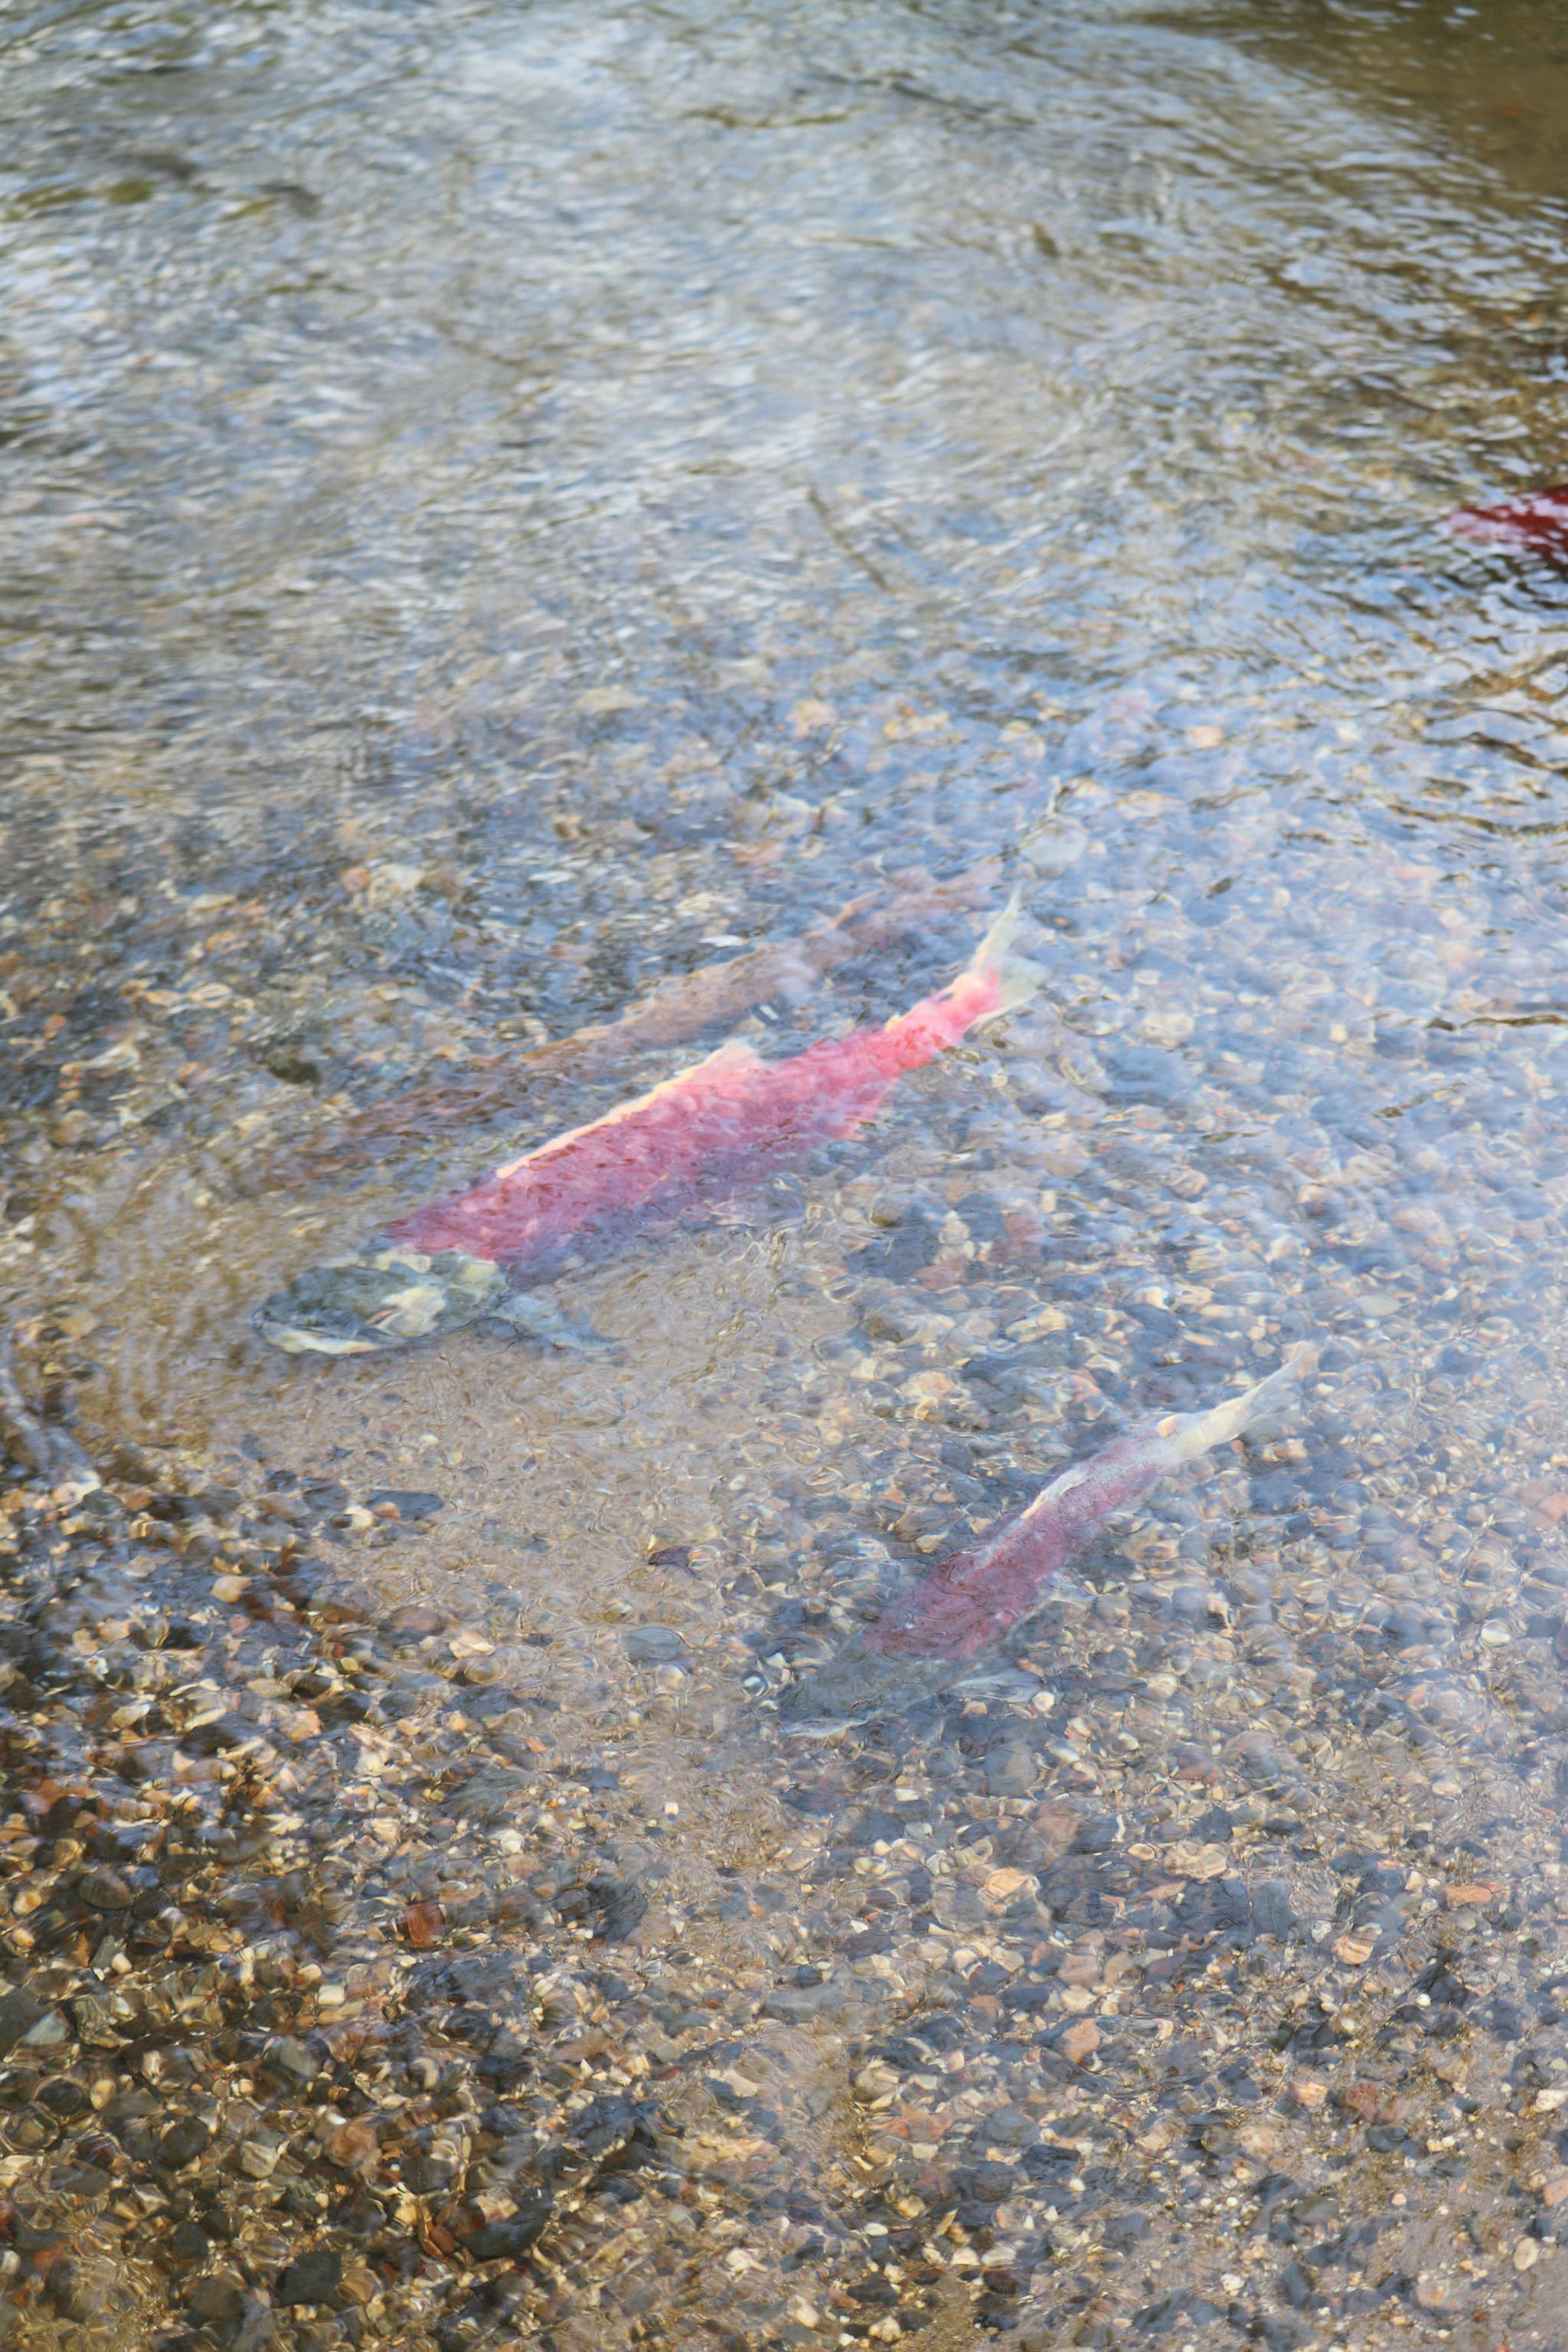 An average-sized spawning sockeye, above, as compared to a spawning jack sockeye salmon, which has spent just one year at sea, as seen in Bristol Bay’s Wood River watershed in August 2018. (Mary Catharine Martin | SalmonState)